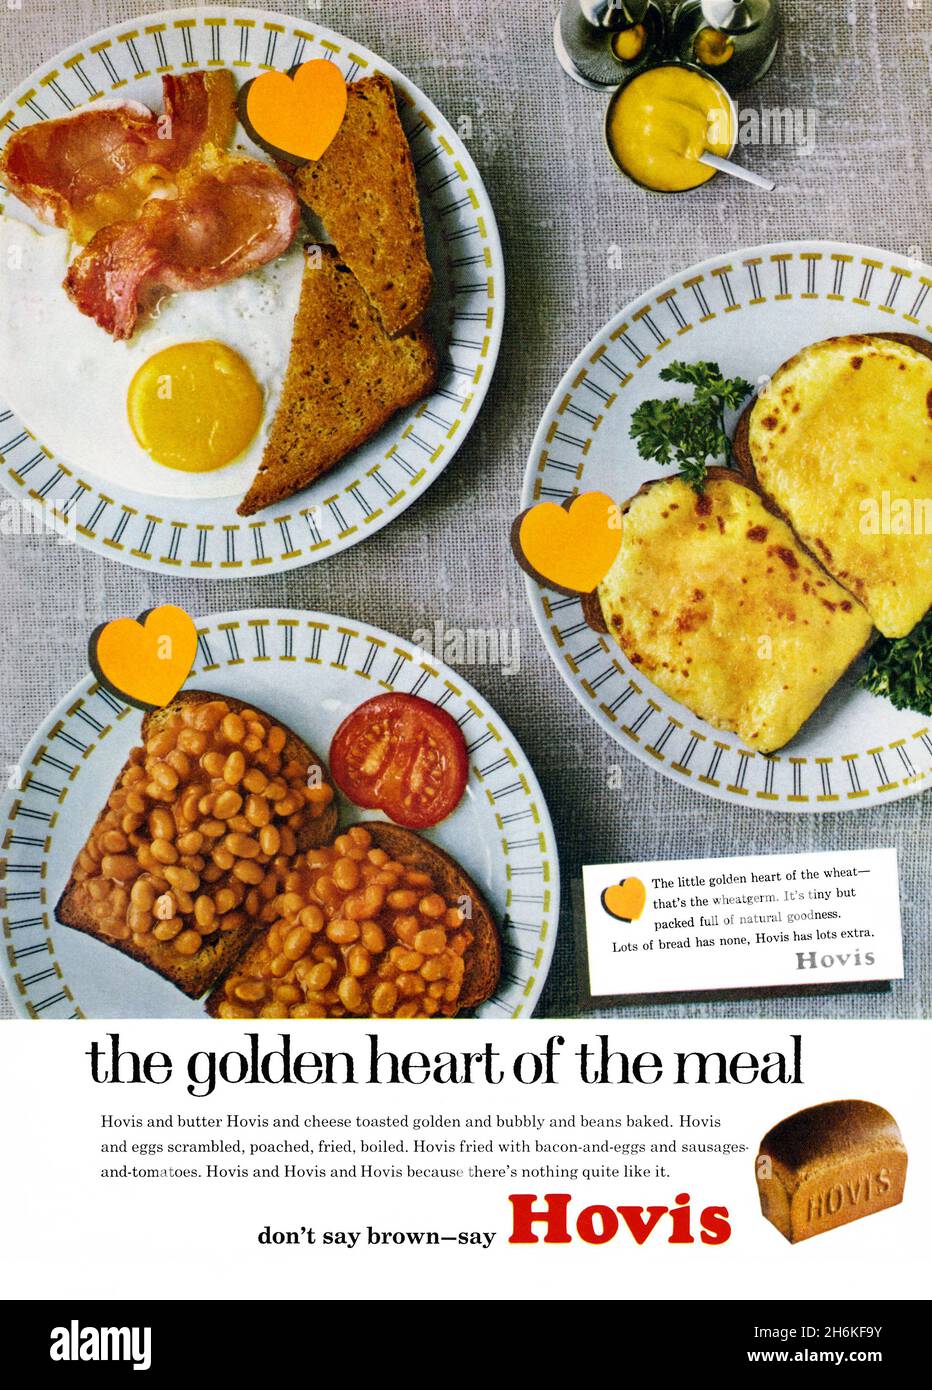 A 1960s advert for Hovis bread. The advert appeared in a magazine published in the UK in March 1965. The photograph shows some plates of breakfast dishes – beans on toast, a fry-up and melted cheese on toast. Graphic gold ‘hearts’ indicate that Hovis is ‘the golden heart of the meal’. At the base is the popular slogan ‘Don’t say brown – say Hovis’. Hovis Ltd is a British company that produces flour and bread. The brand originated in Stoke-on-Trent and was first mass-produced in Macclesfield, Cheshire, in 1886 – vintage 1960s graphics for editorial use. Stock Photo